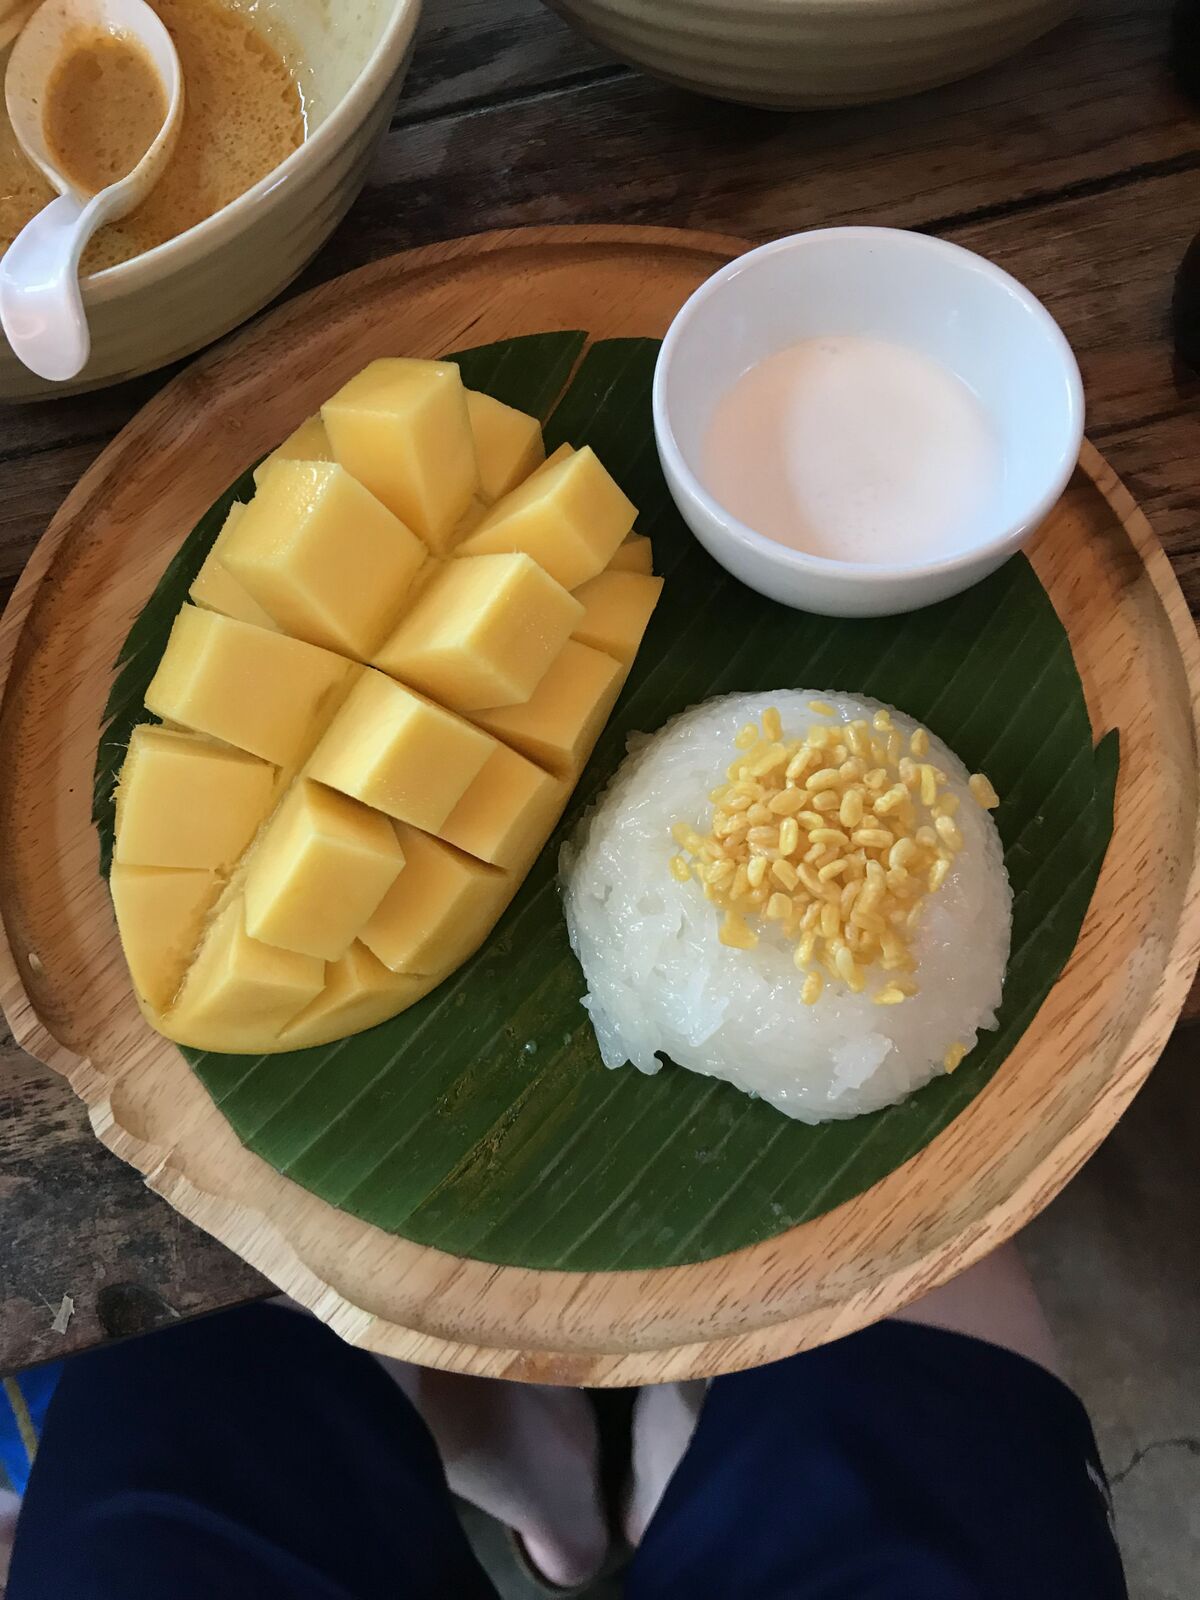 Caption: mango sticky rice, you can never have too much of it. Available on every street corner and consumed at a minimum of 2 times a day. Essential.